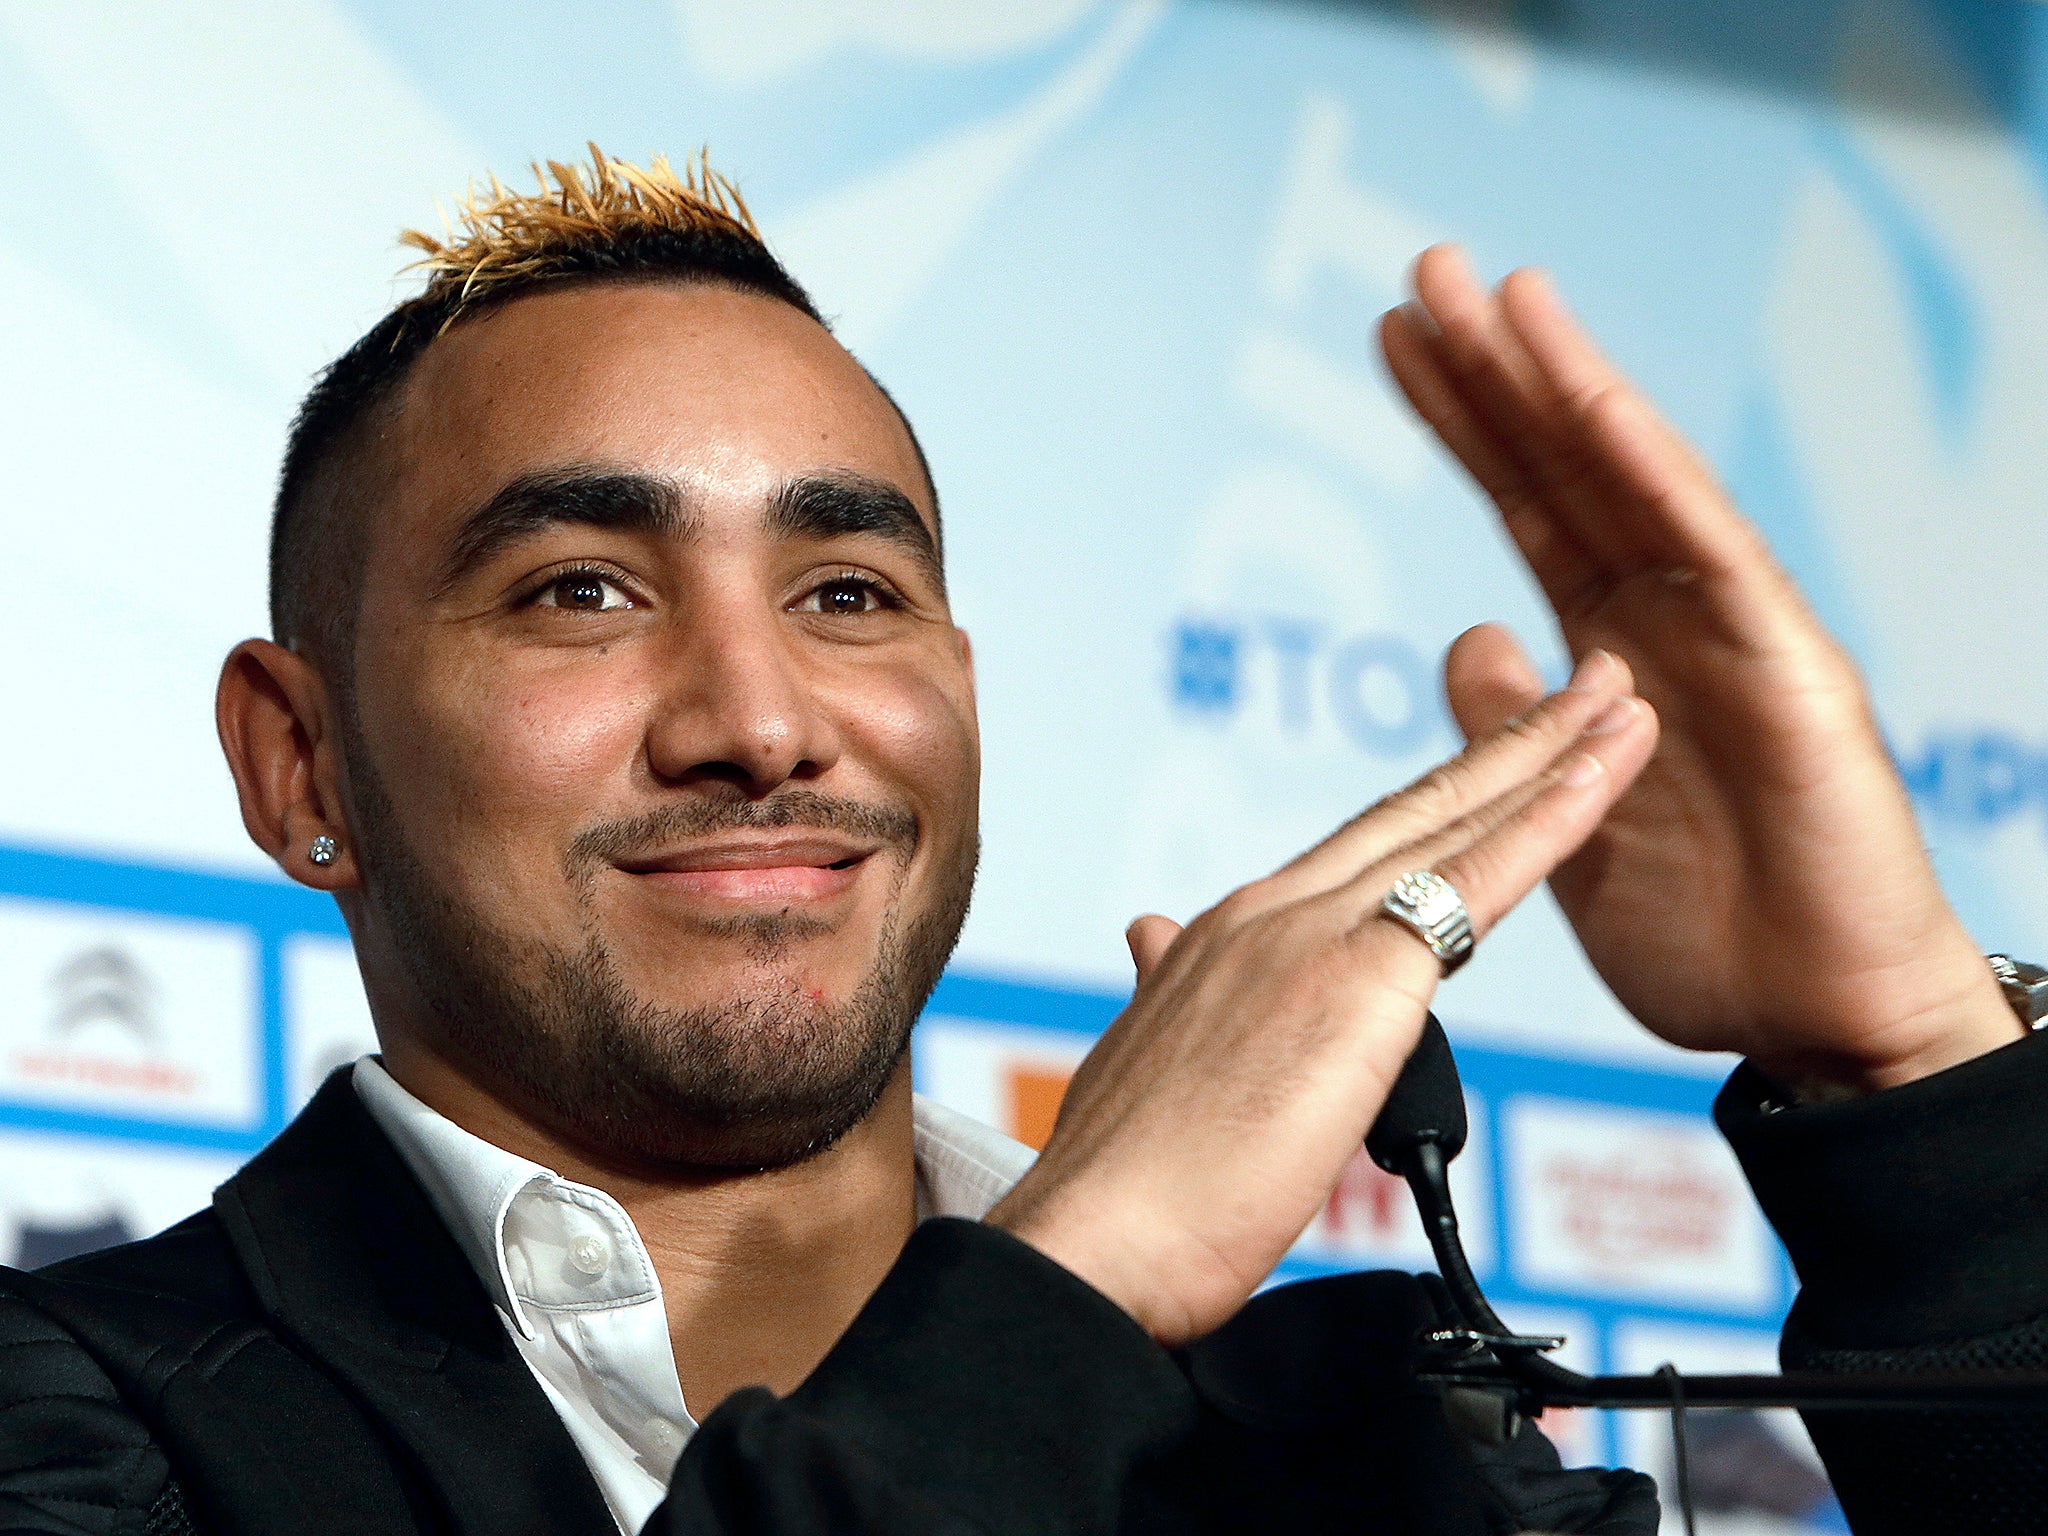 Olympique Marseille new player Dimitri Payet, gestures as he speaks with the media during a press conference, in Marseille